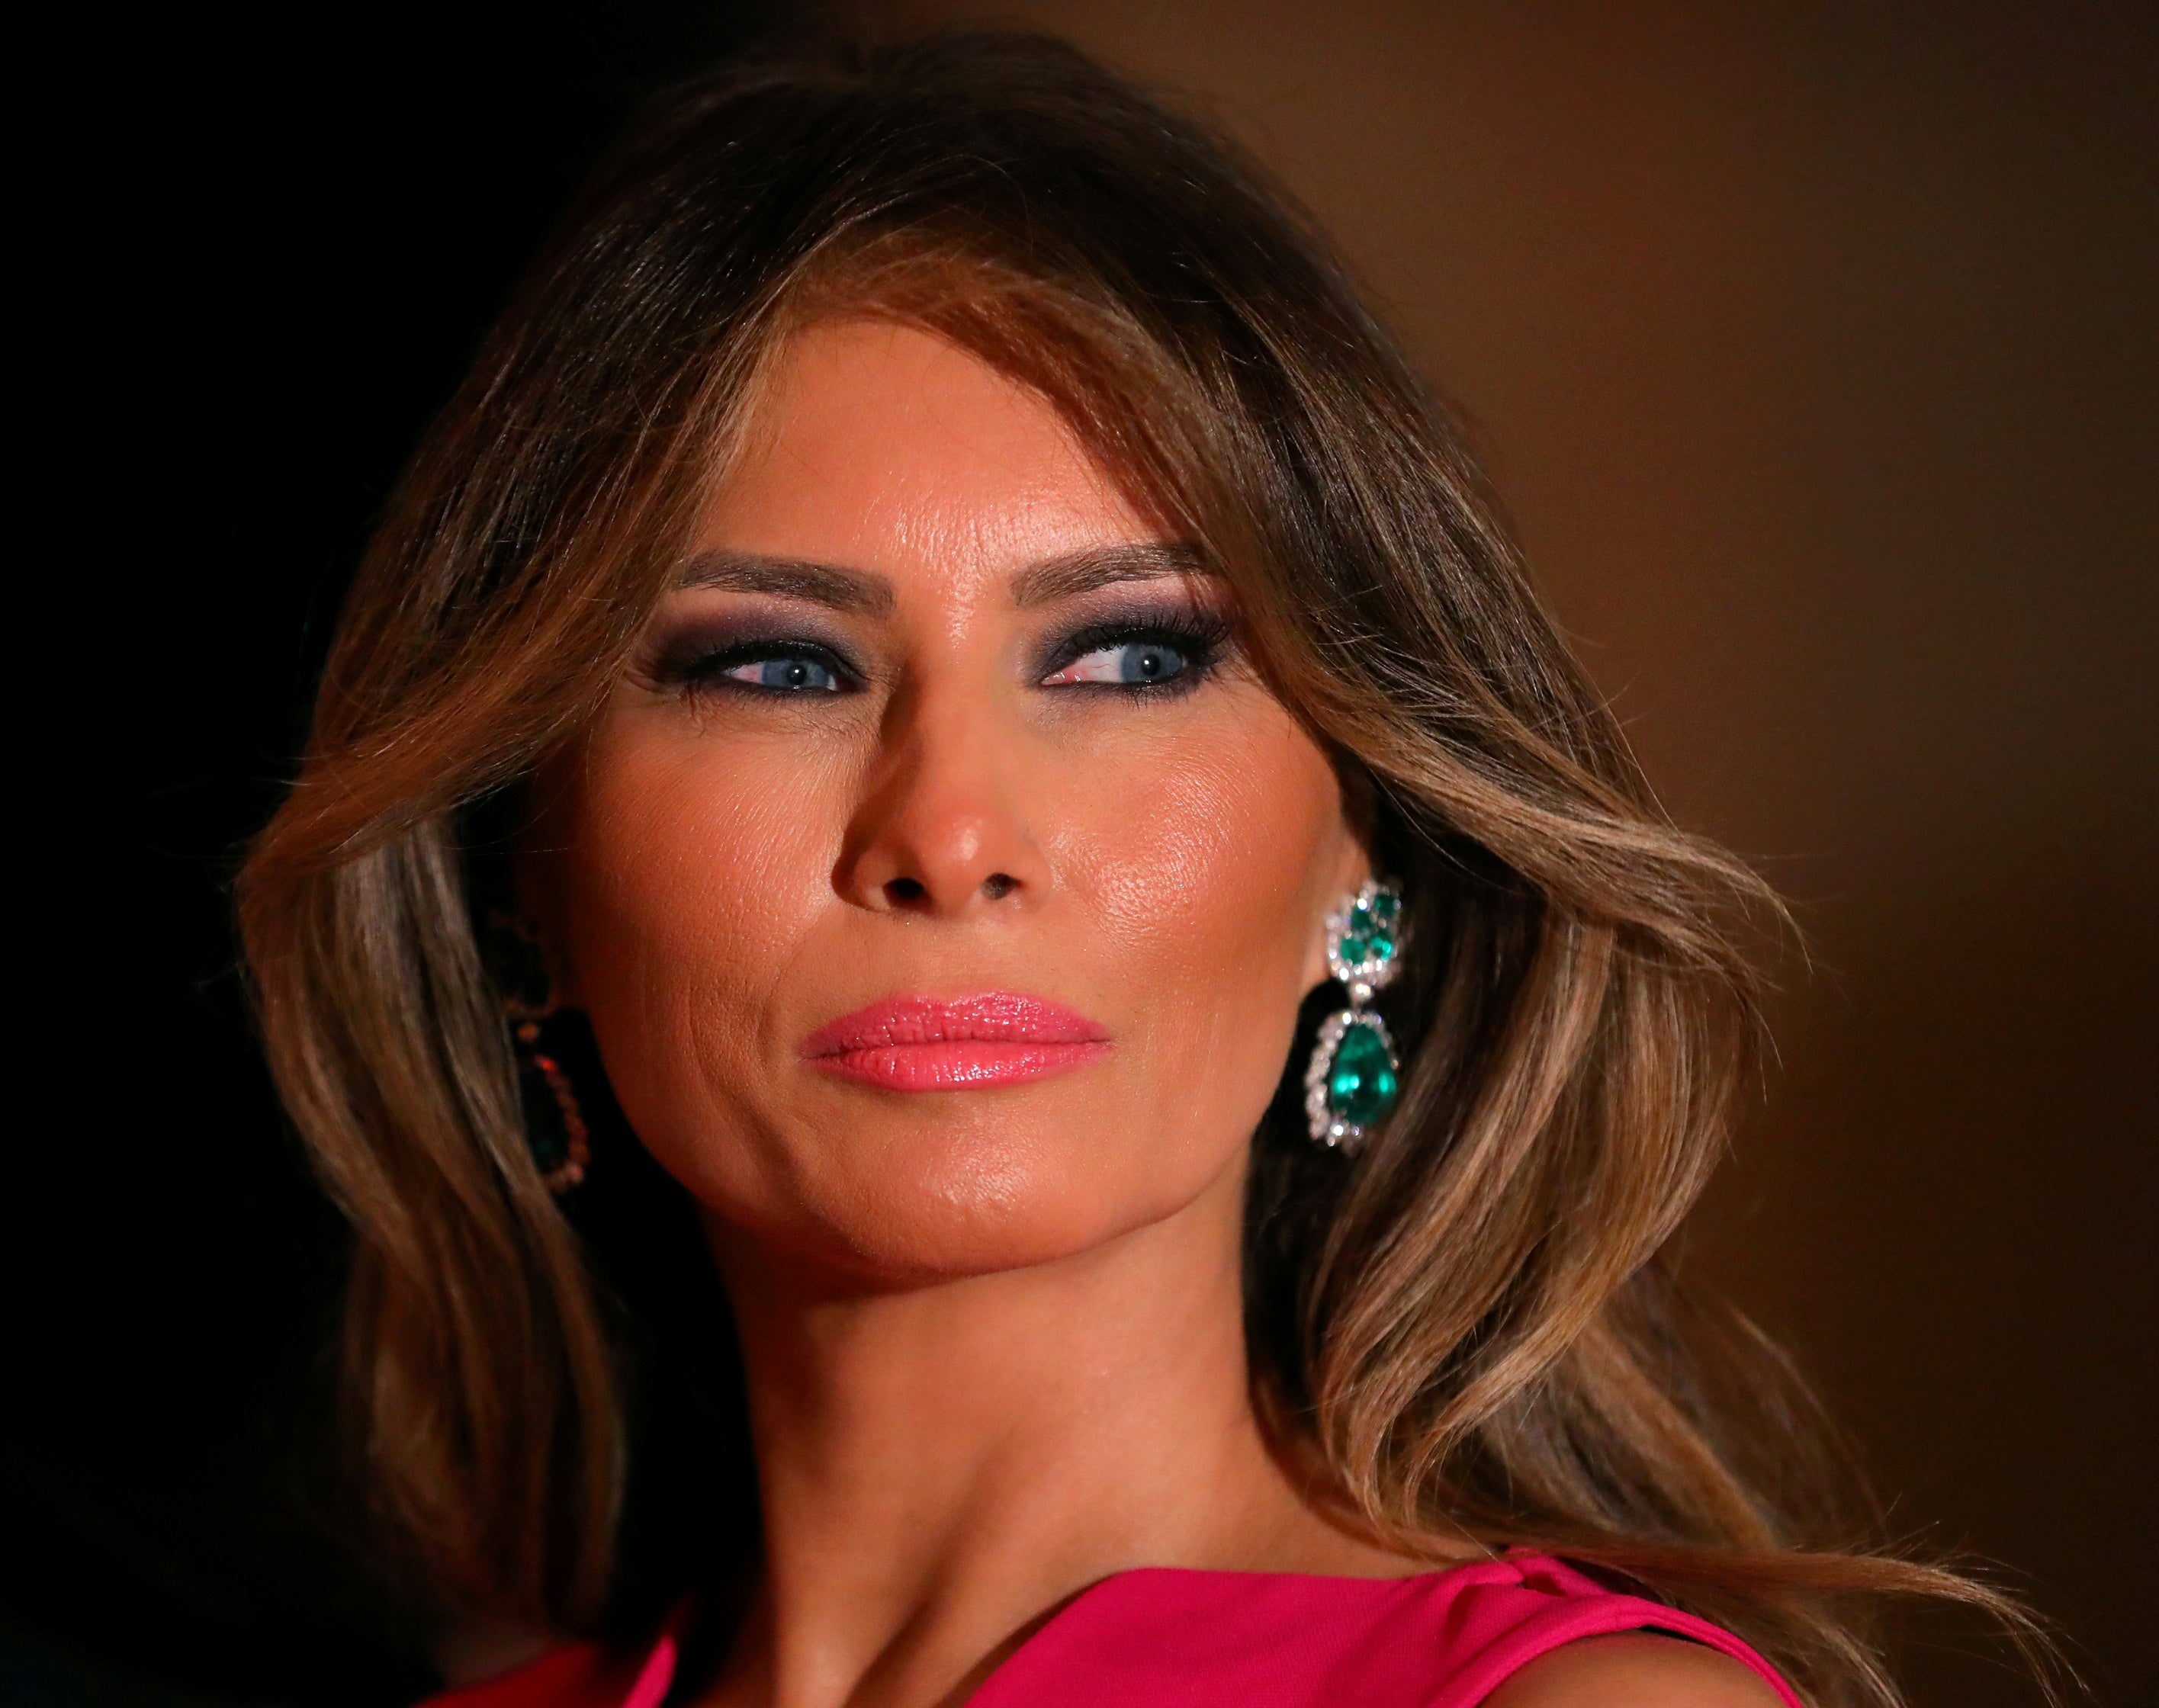 Journalist to appeal ruling that Telegraph apology over her Melania Trump reporting was not defamatory